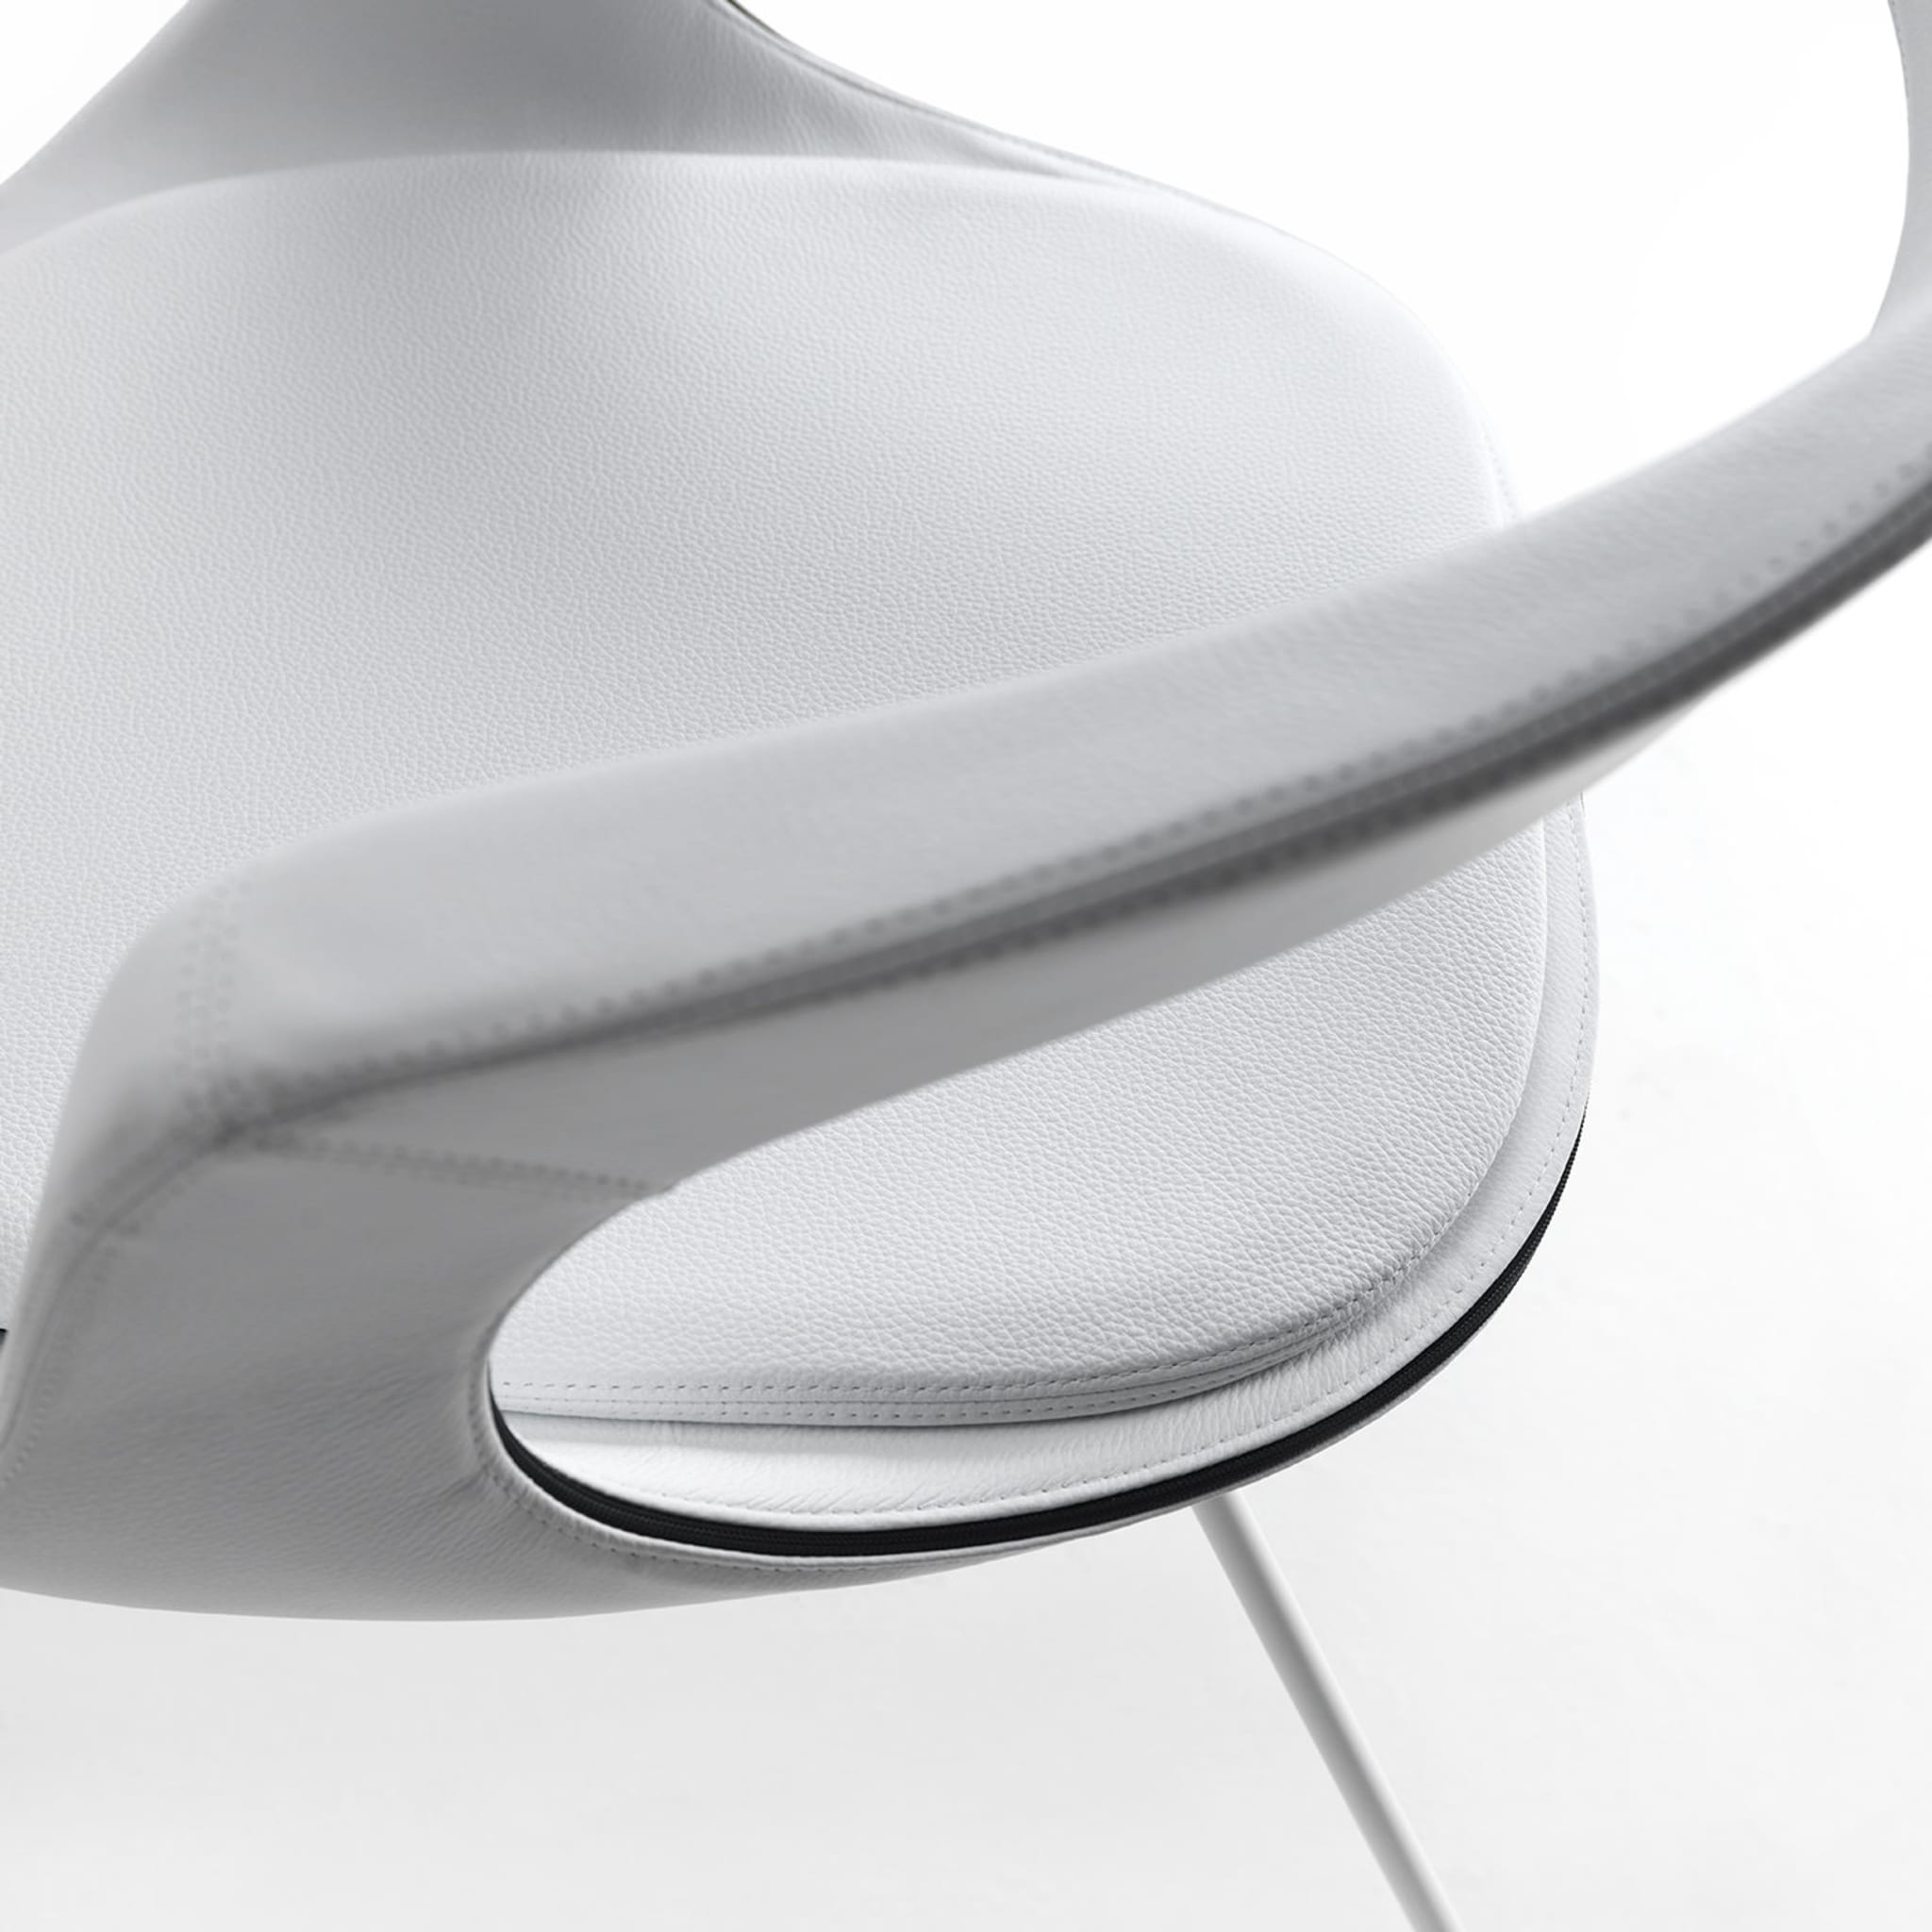 Frenchkiss Low-Backed Sled-Base Chair by Stefano Bigi - Alternative view 1